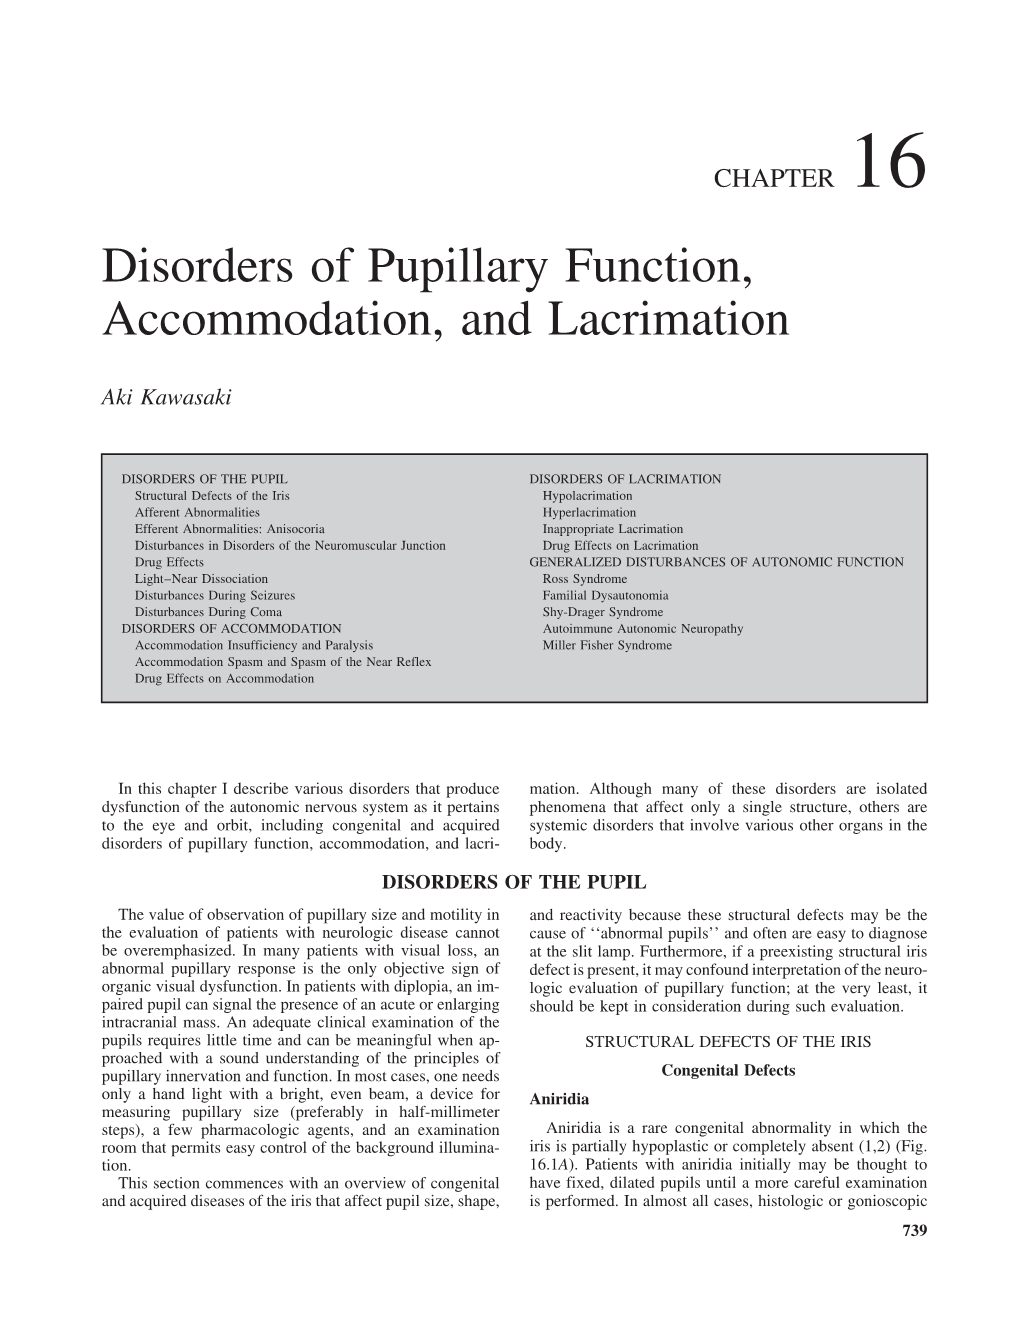 Disorders of Pupillary Function, Accommodation, and Lacrimation